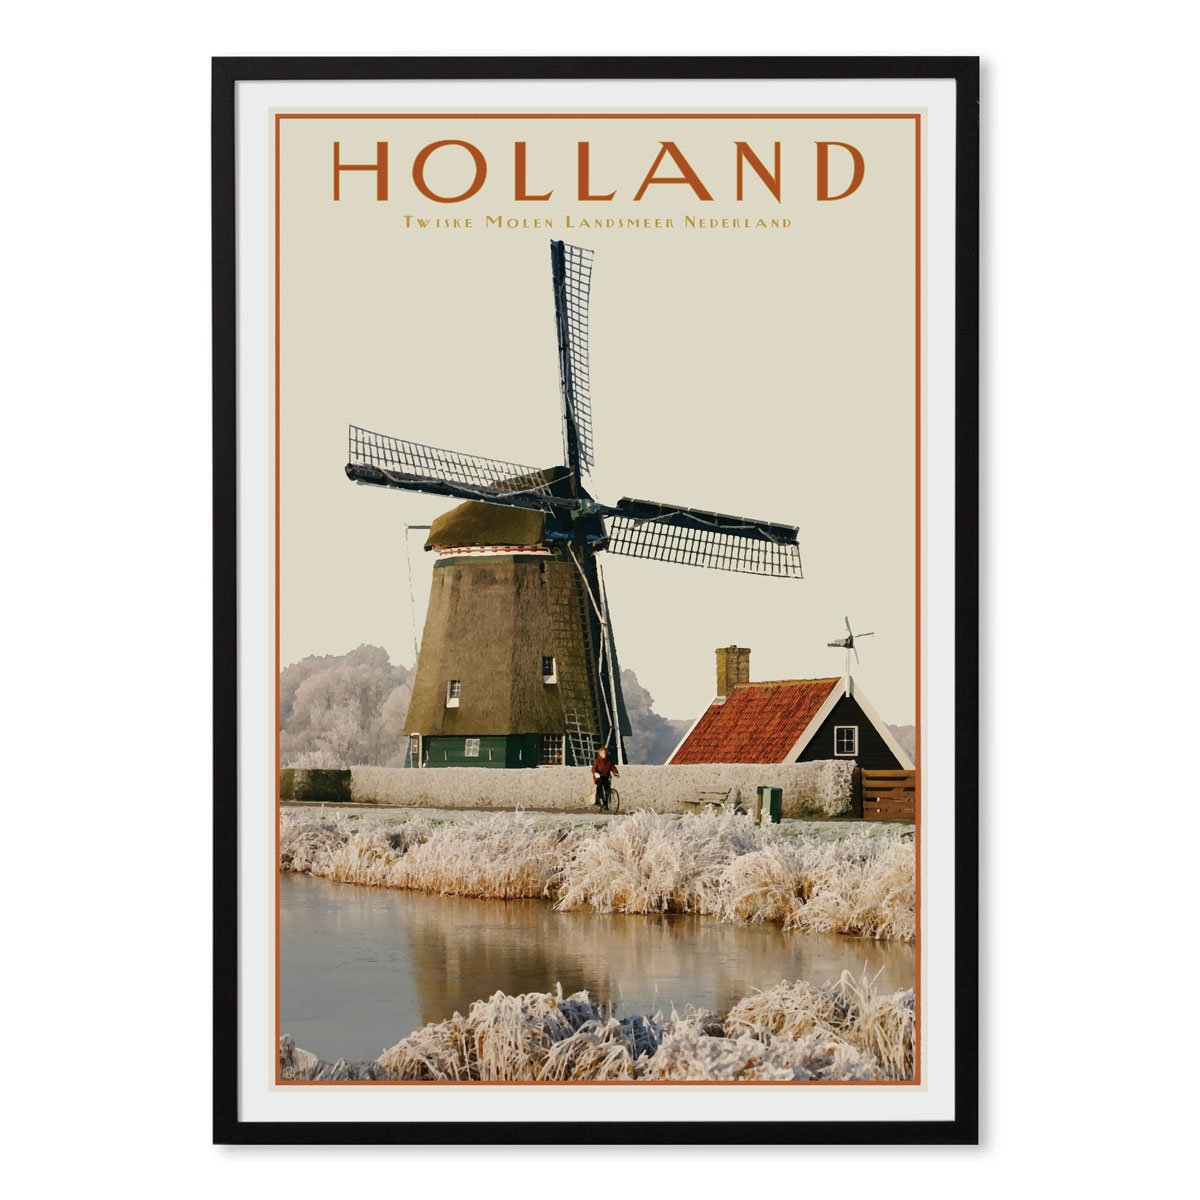 North Holland Windmill black framed print. Vintage travel style poster. Original design by places we luv